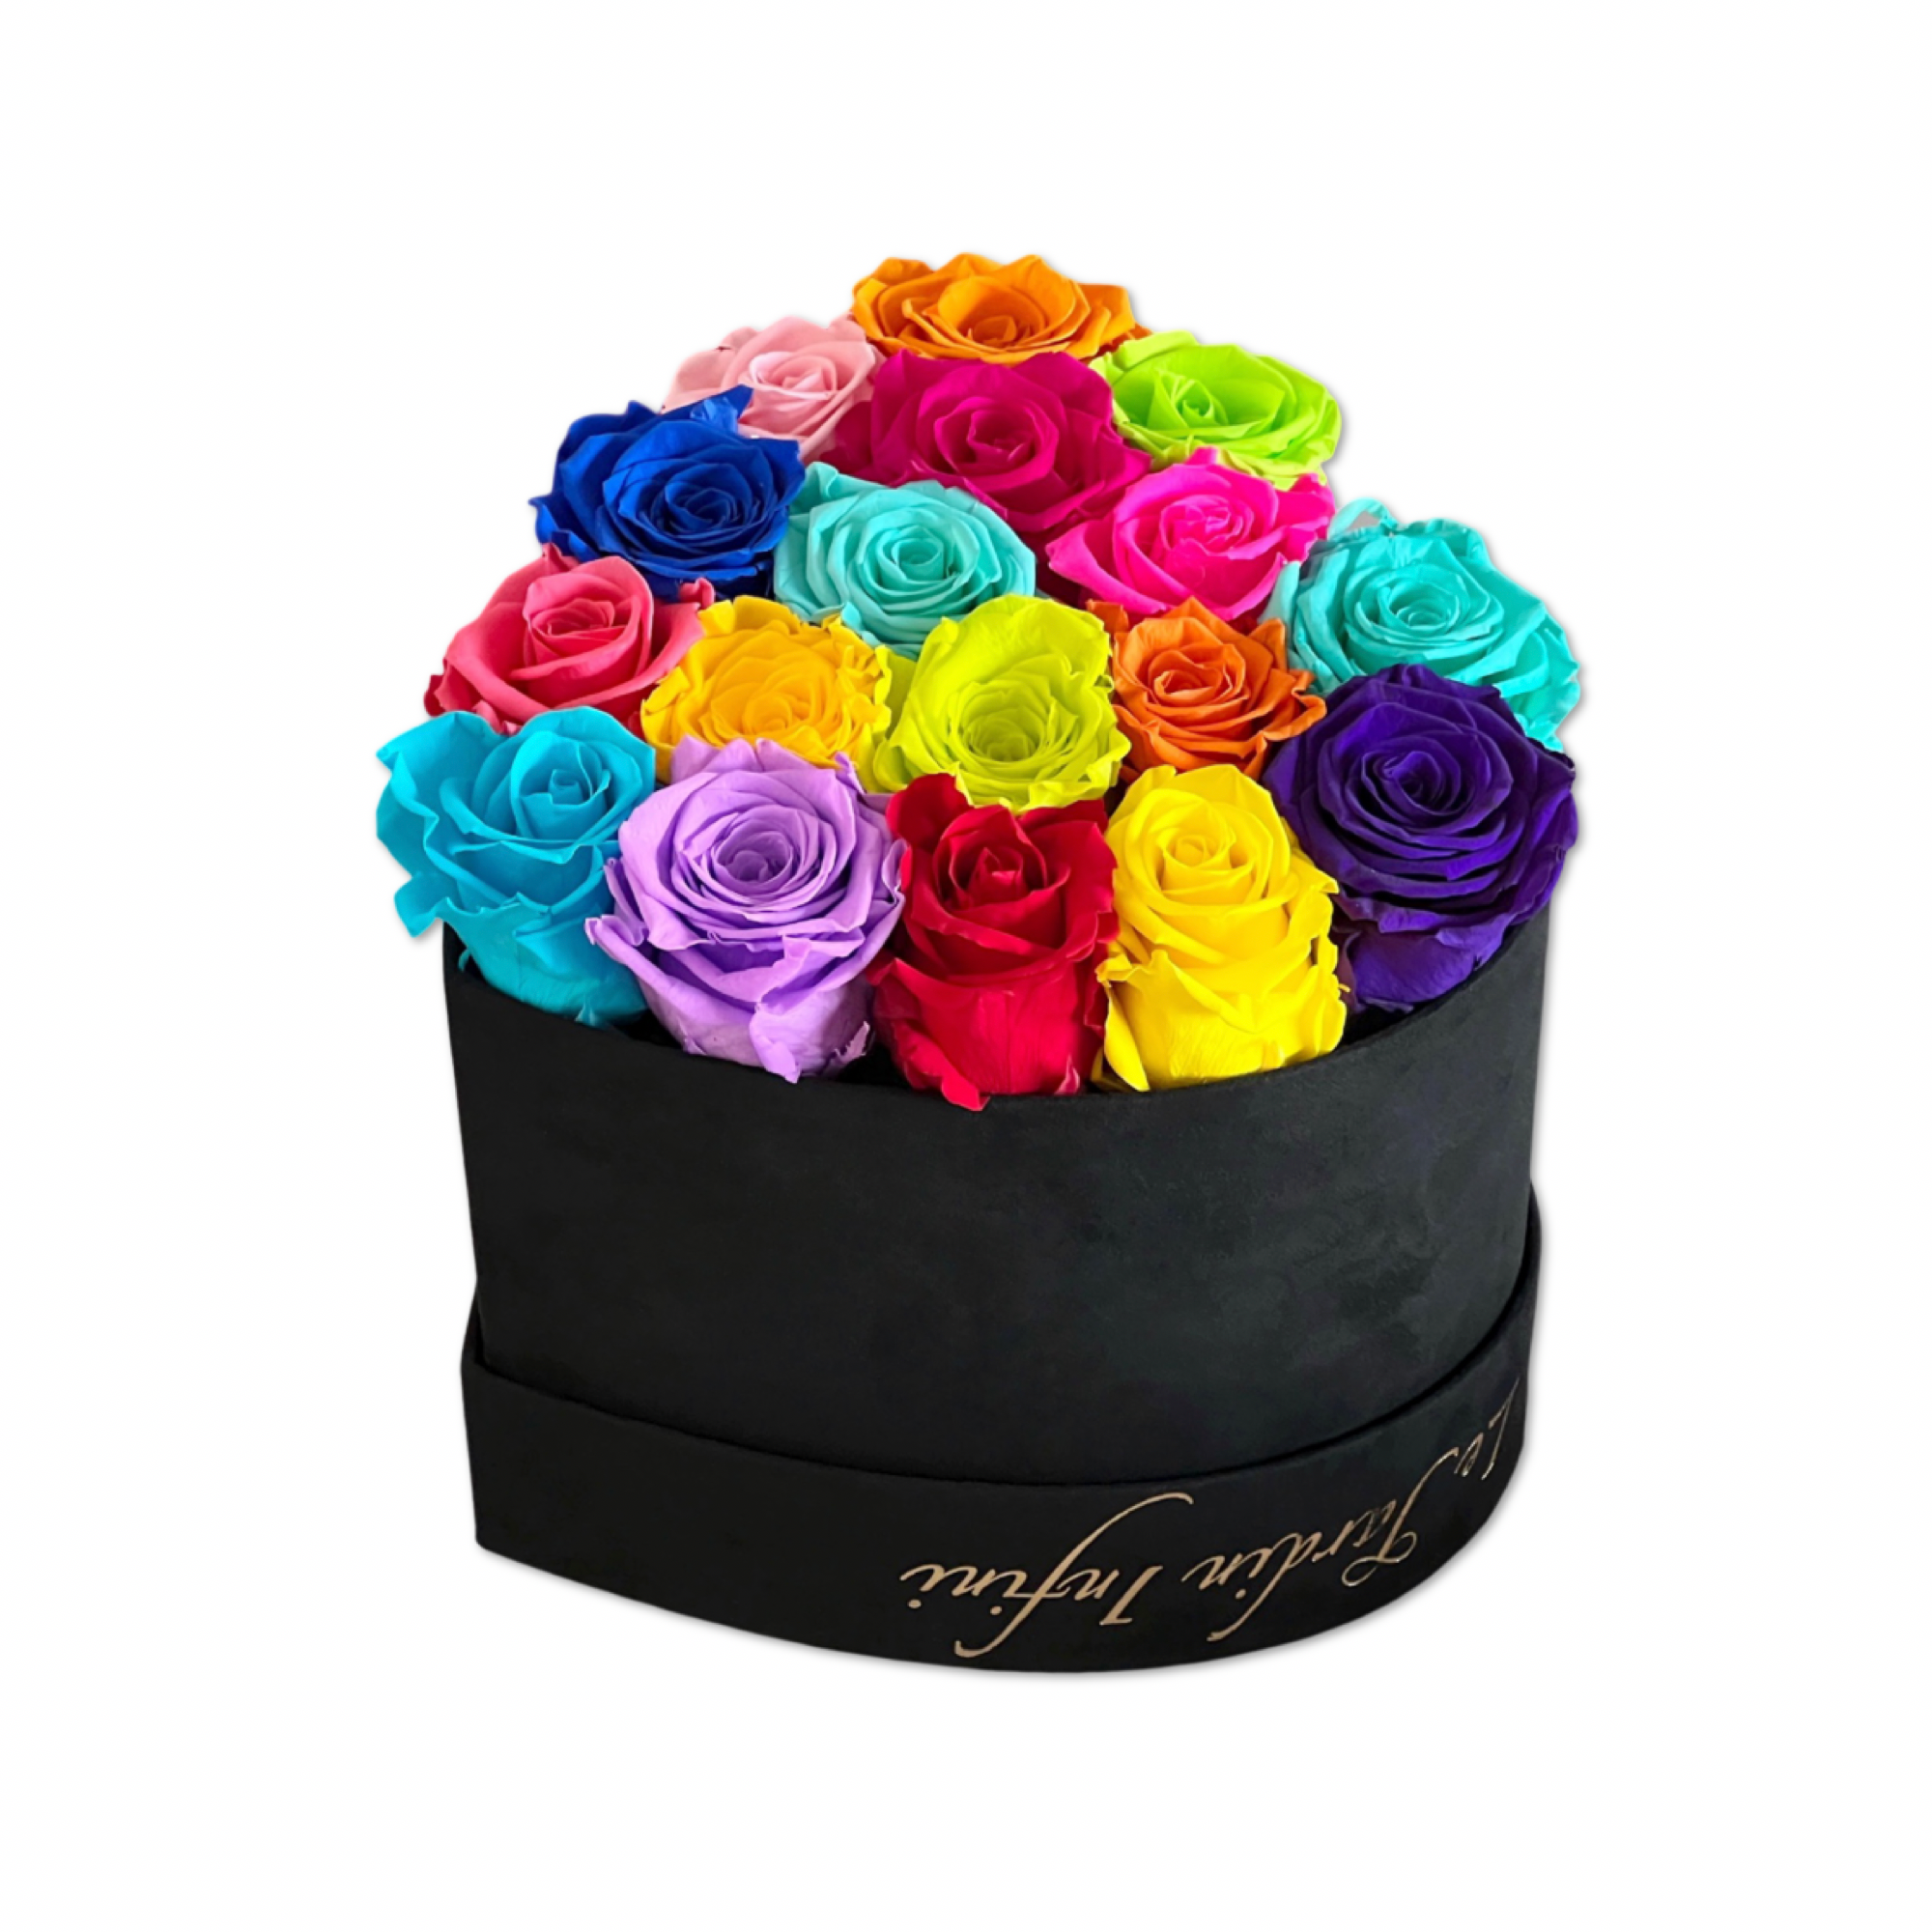 Multi-Color Preserved Roses in A Heart Shaped Box -16-18 Roses Heart Luxury Black Suede Box